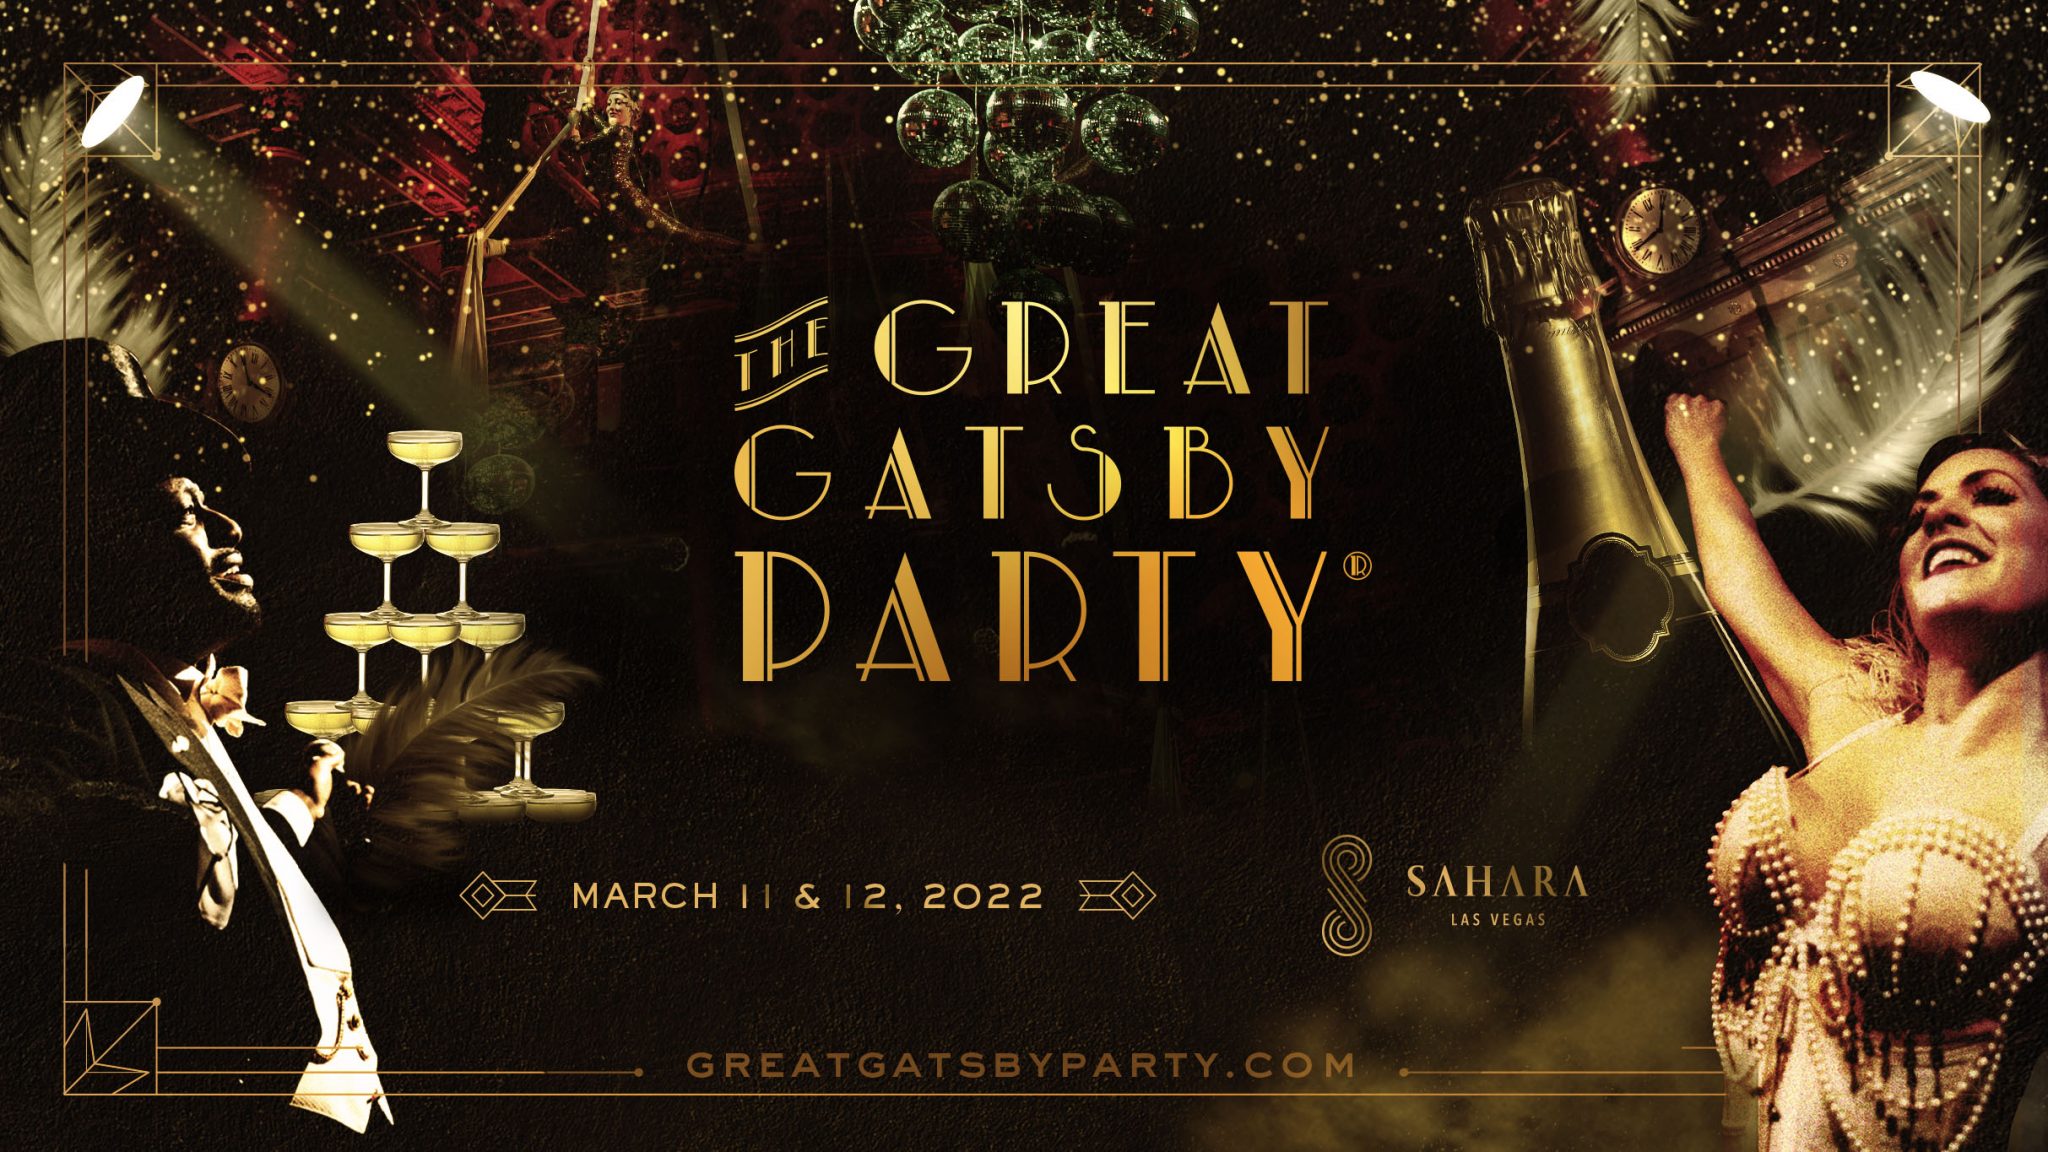 The Great Gatsby copy against a black background